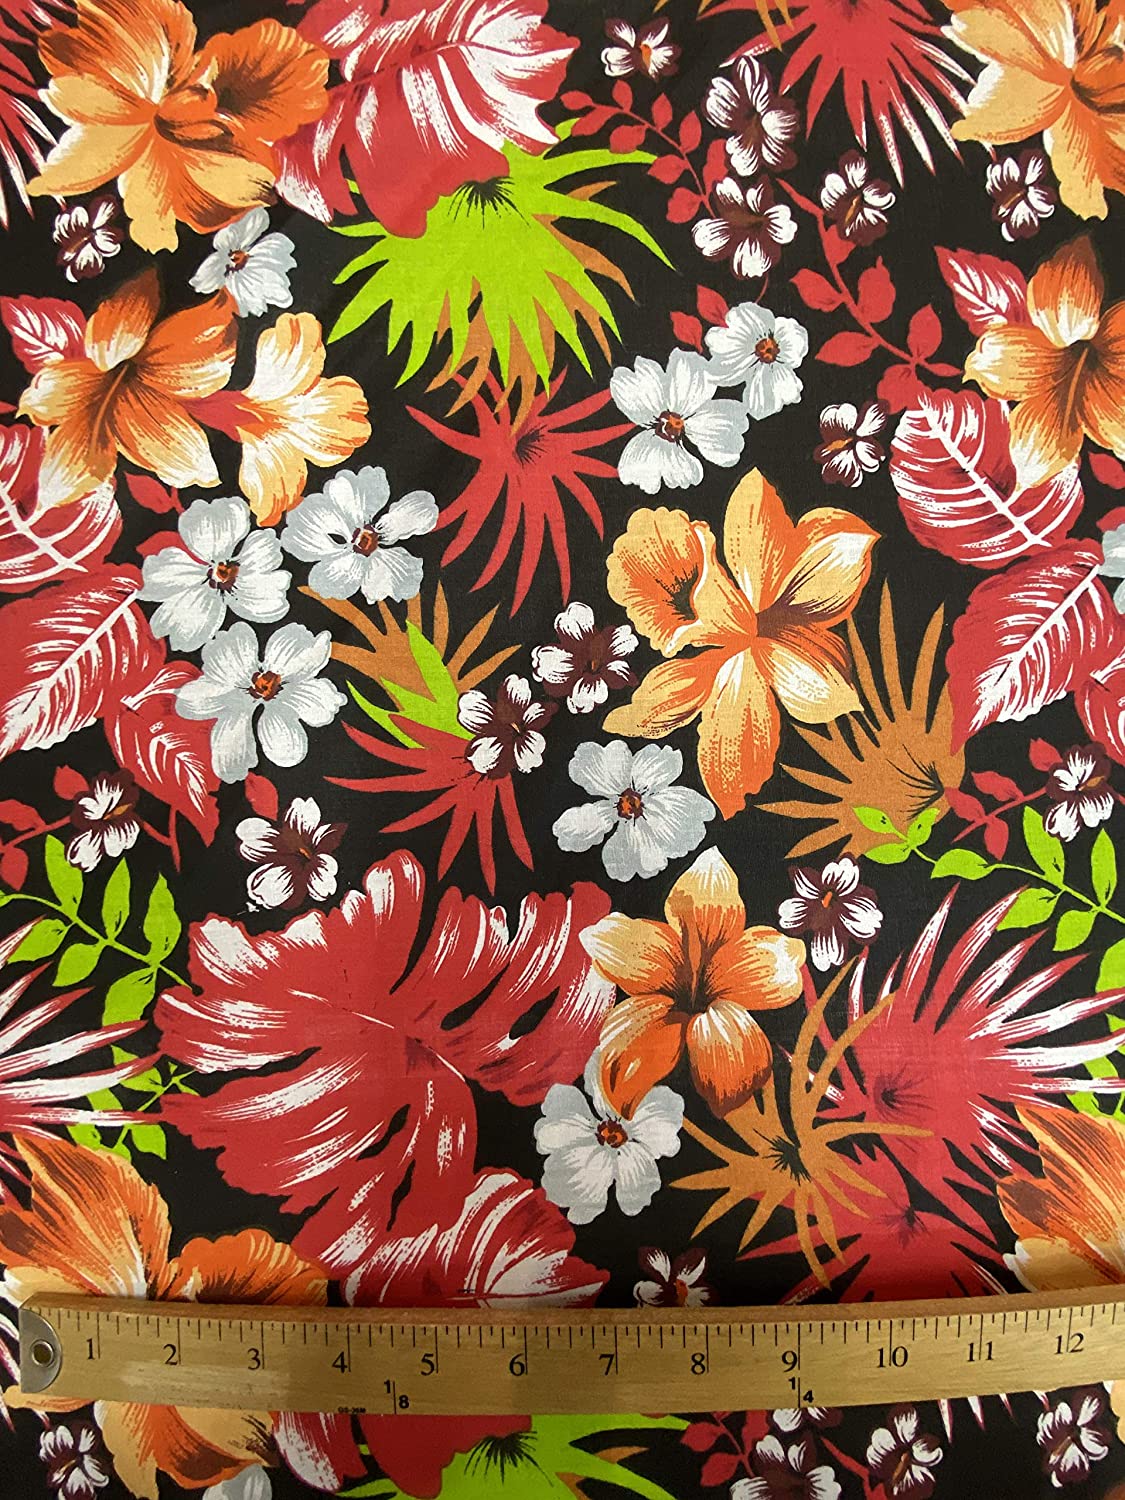 65% Polyester 35% Cotton Hawaiian Print Poly/Cotton Fabric, Good for Face Mask Covers (Red on Black, 1 Yard)